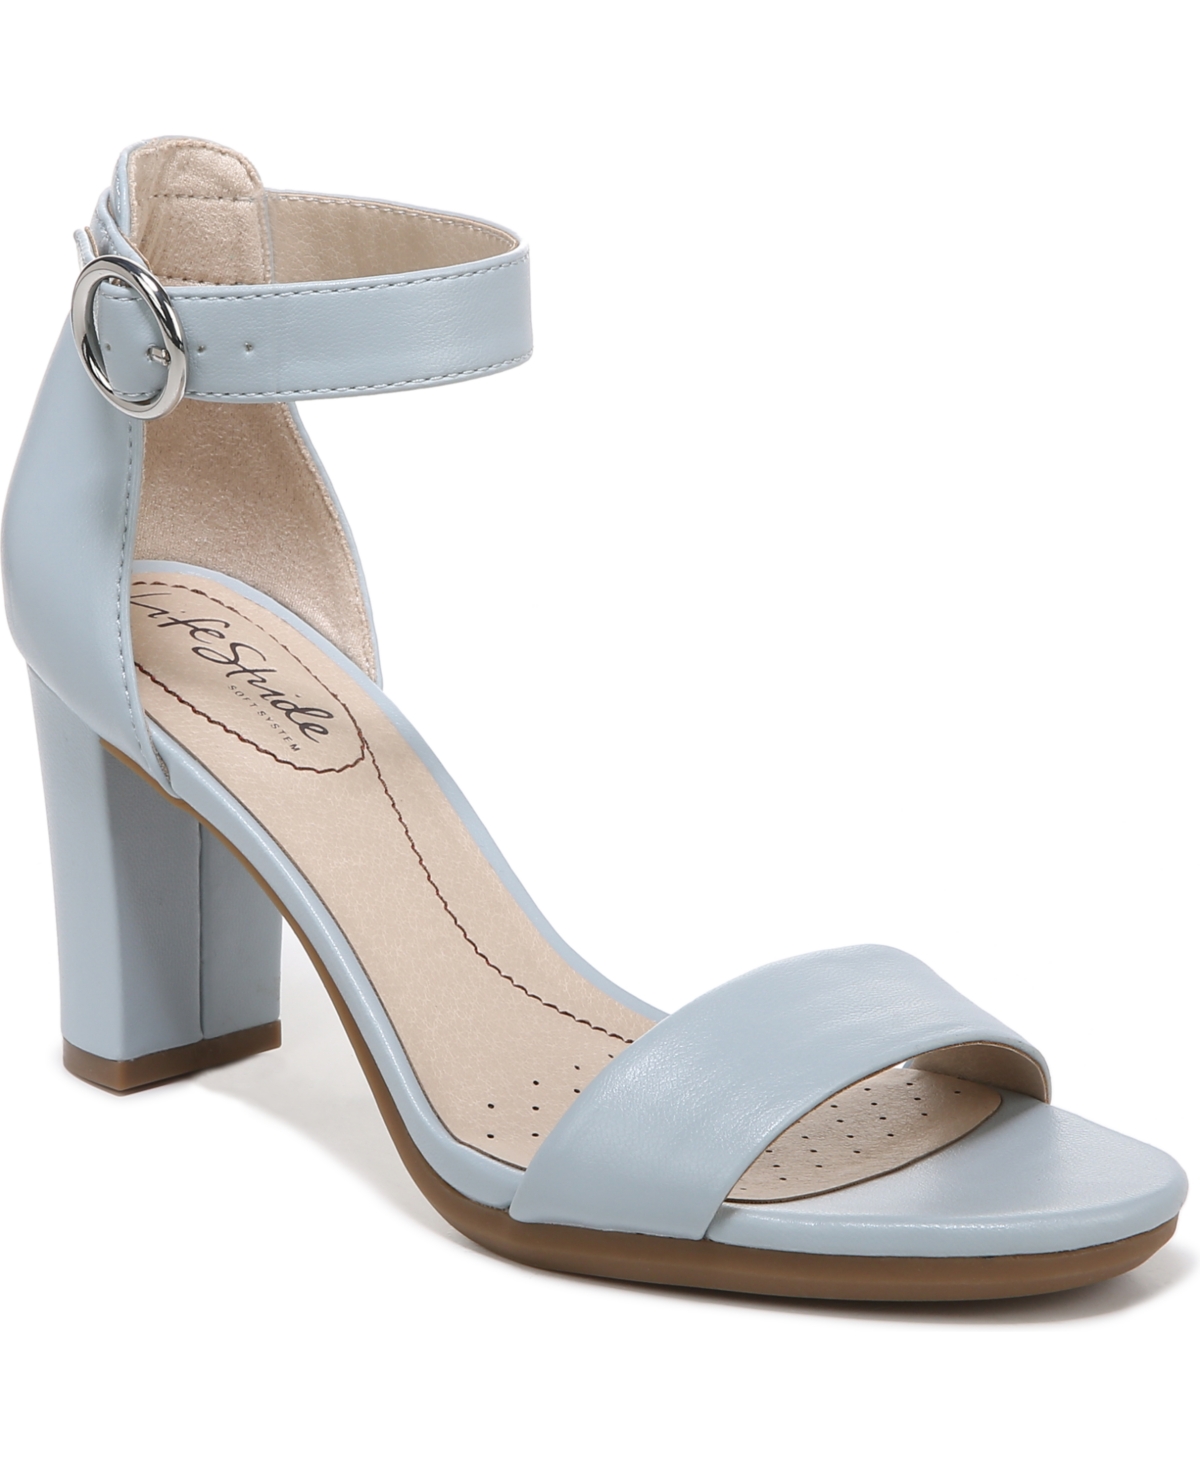 Lifestride Averly City Sandals In Pearl Blue Faux Leather